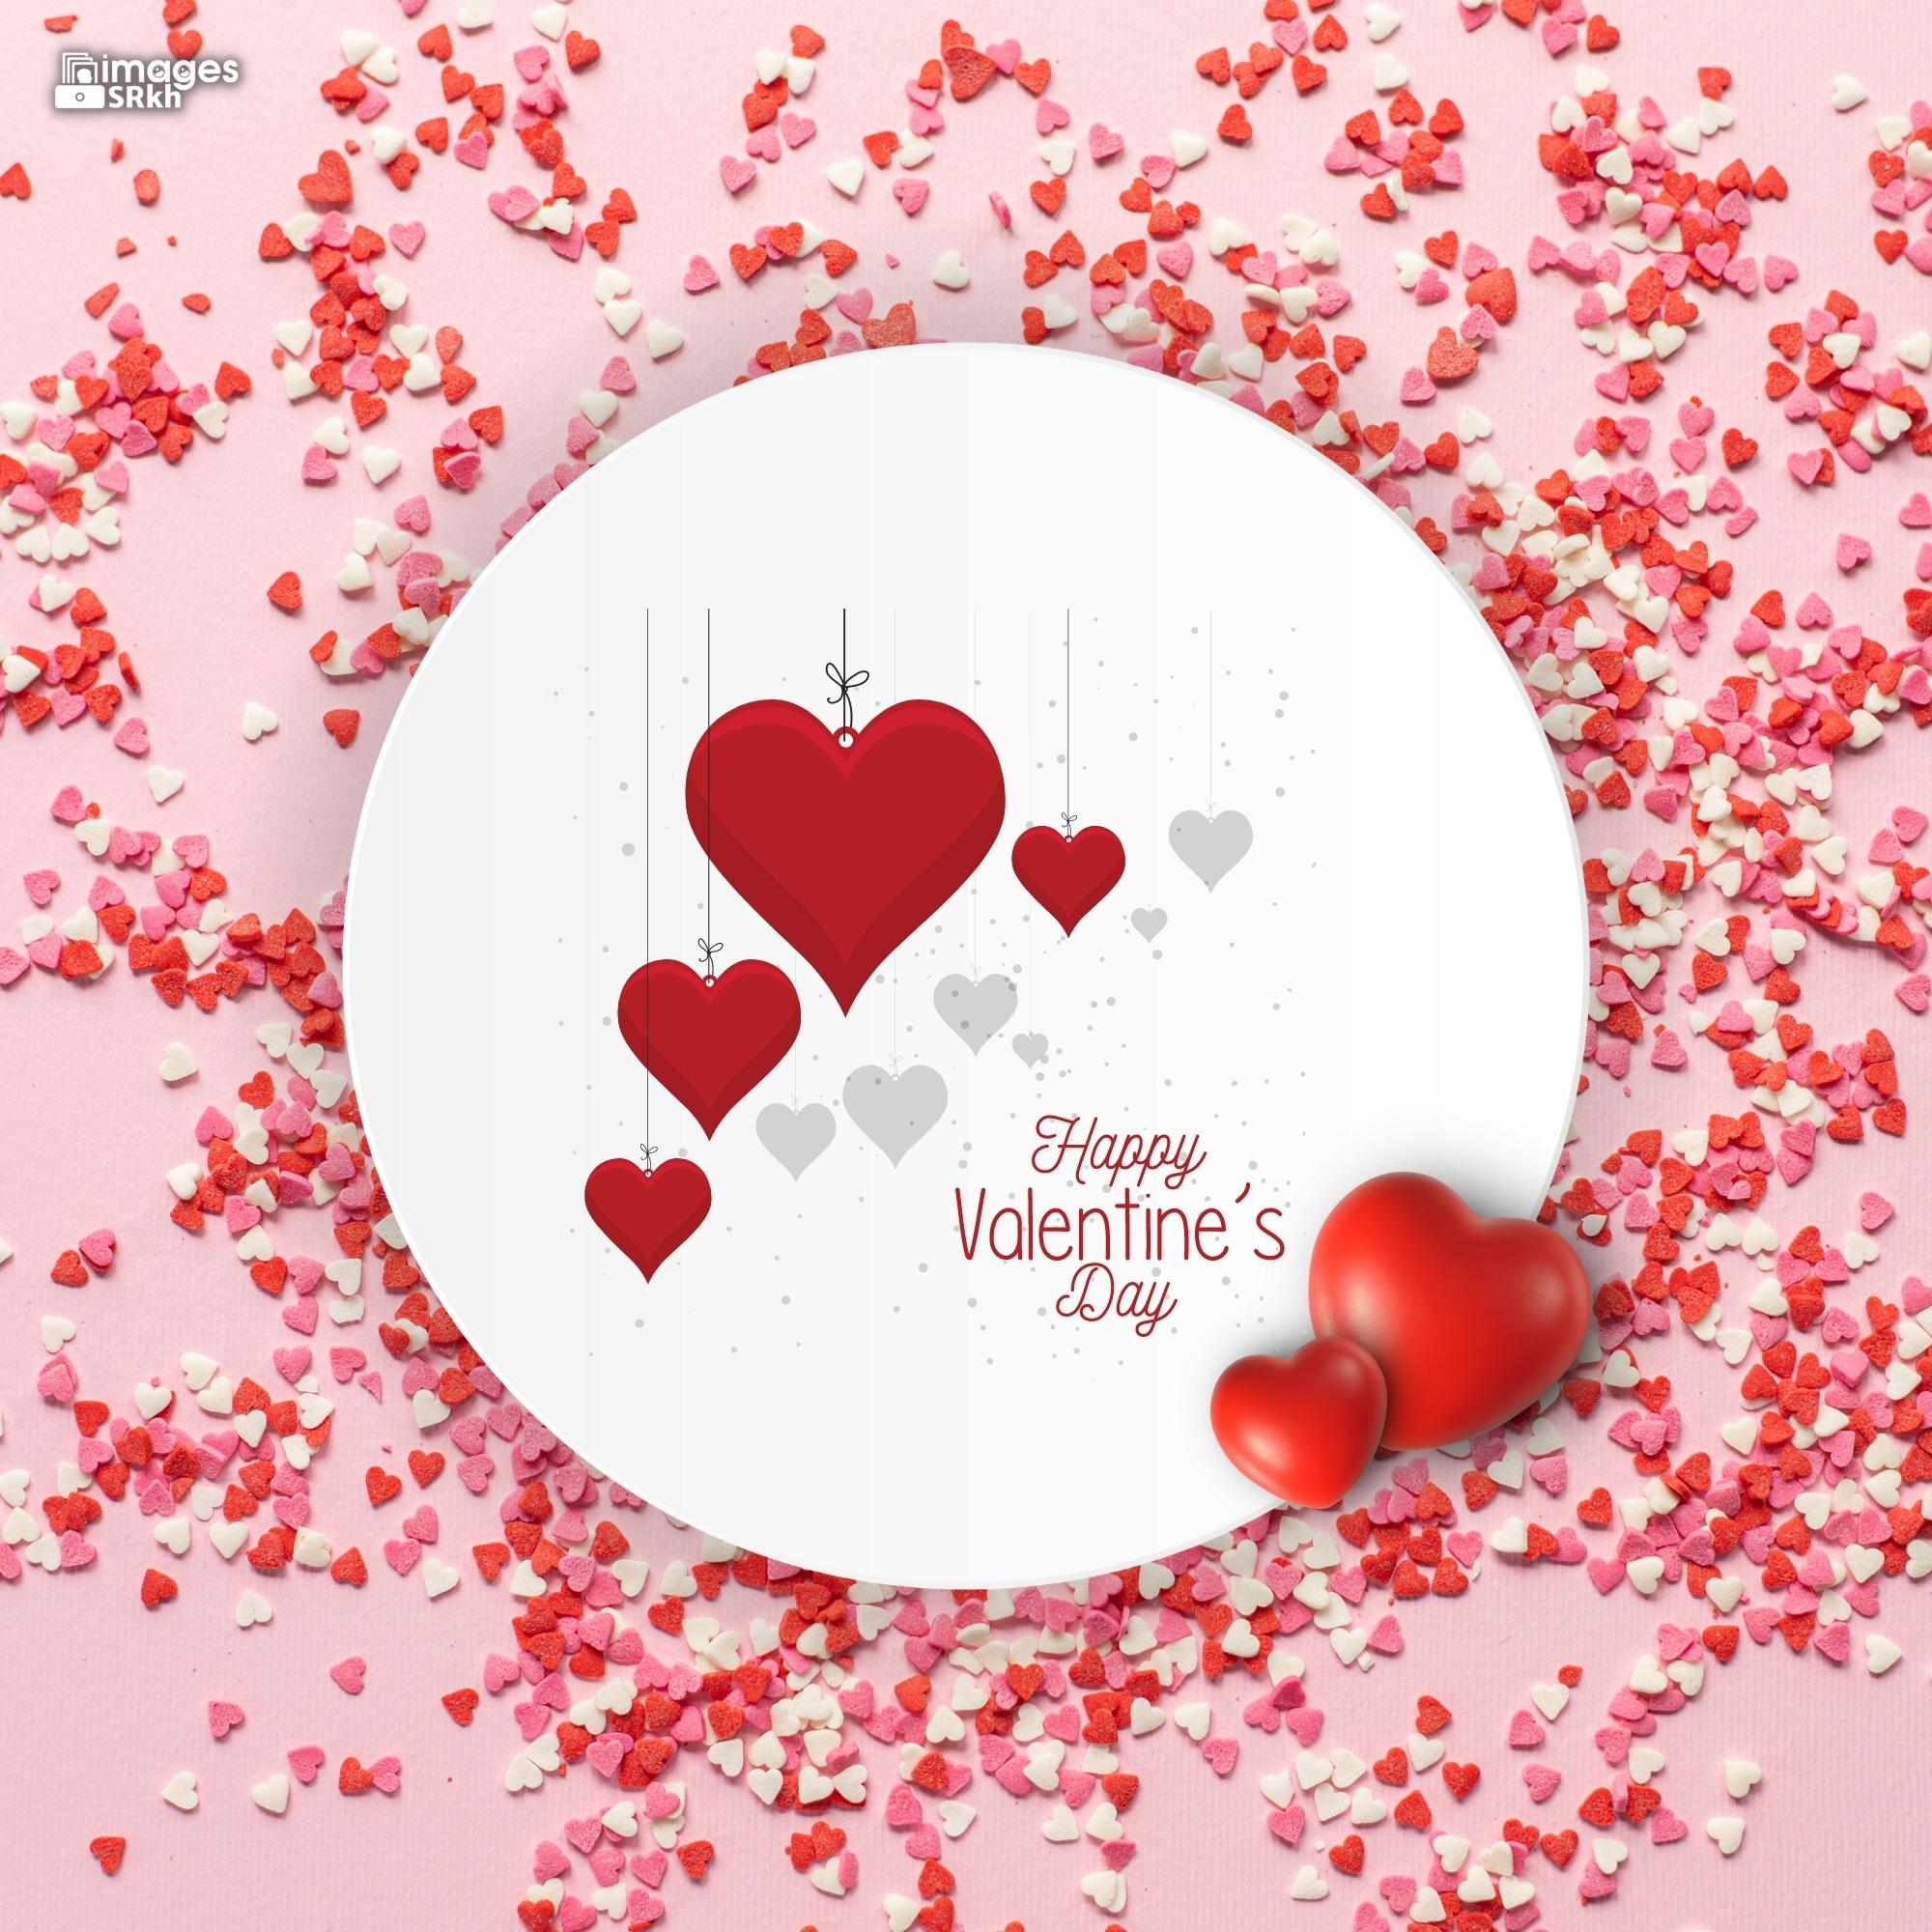 Happy Valentines Day | 456 | PREMIUM IMAGES | Wishes for Love